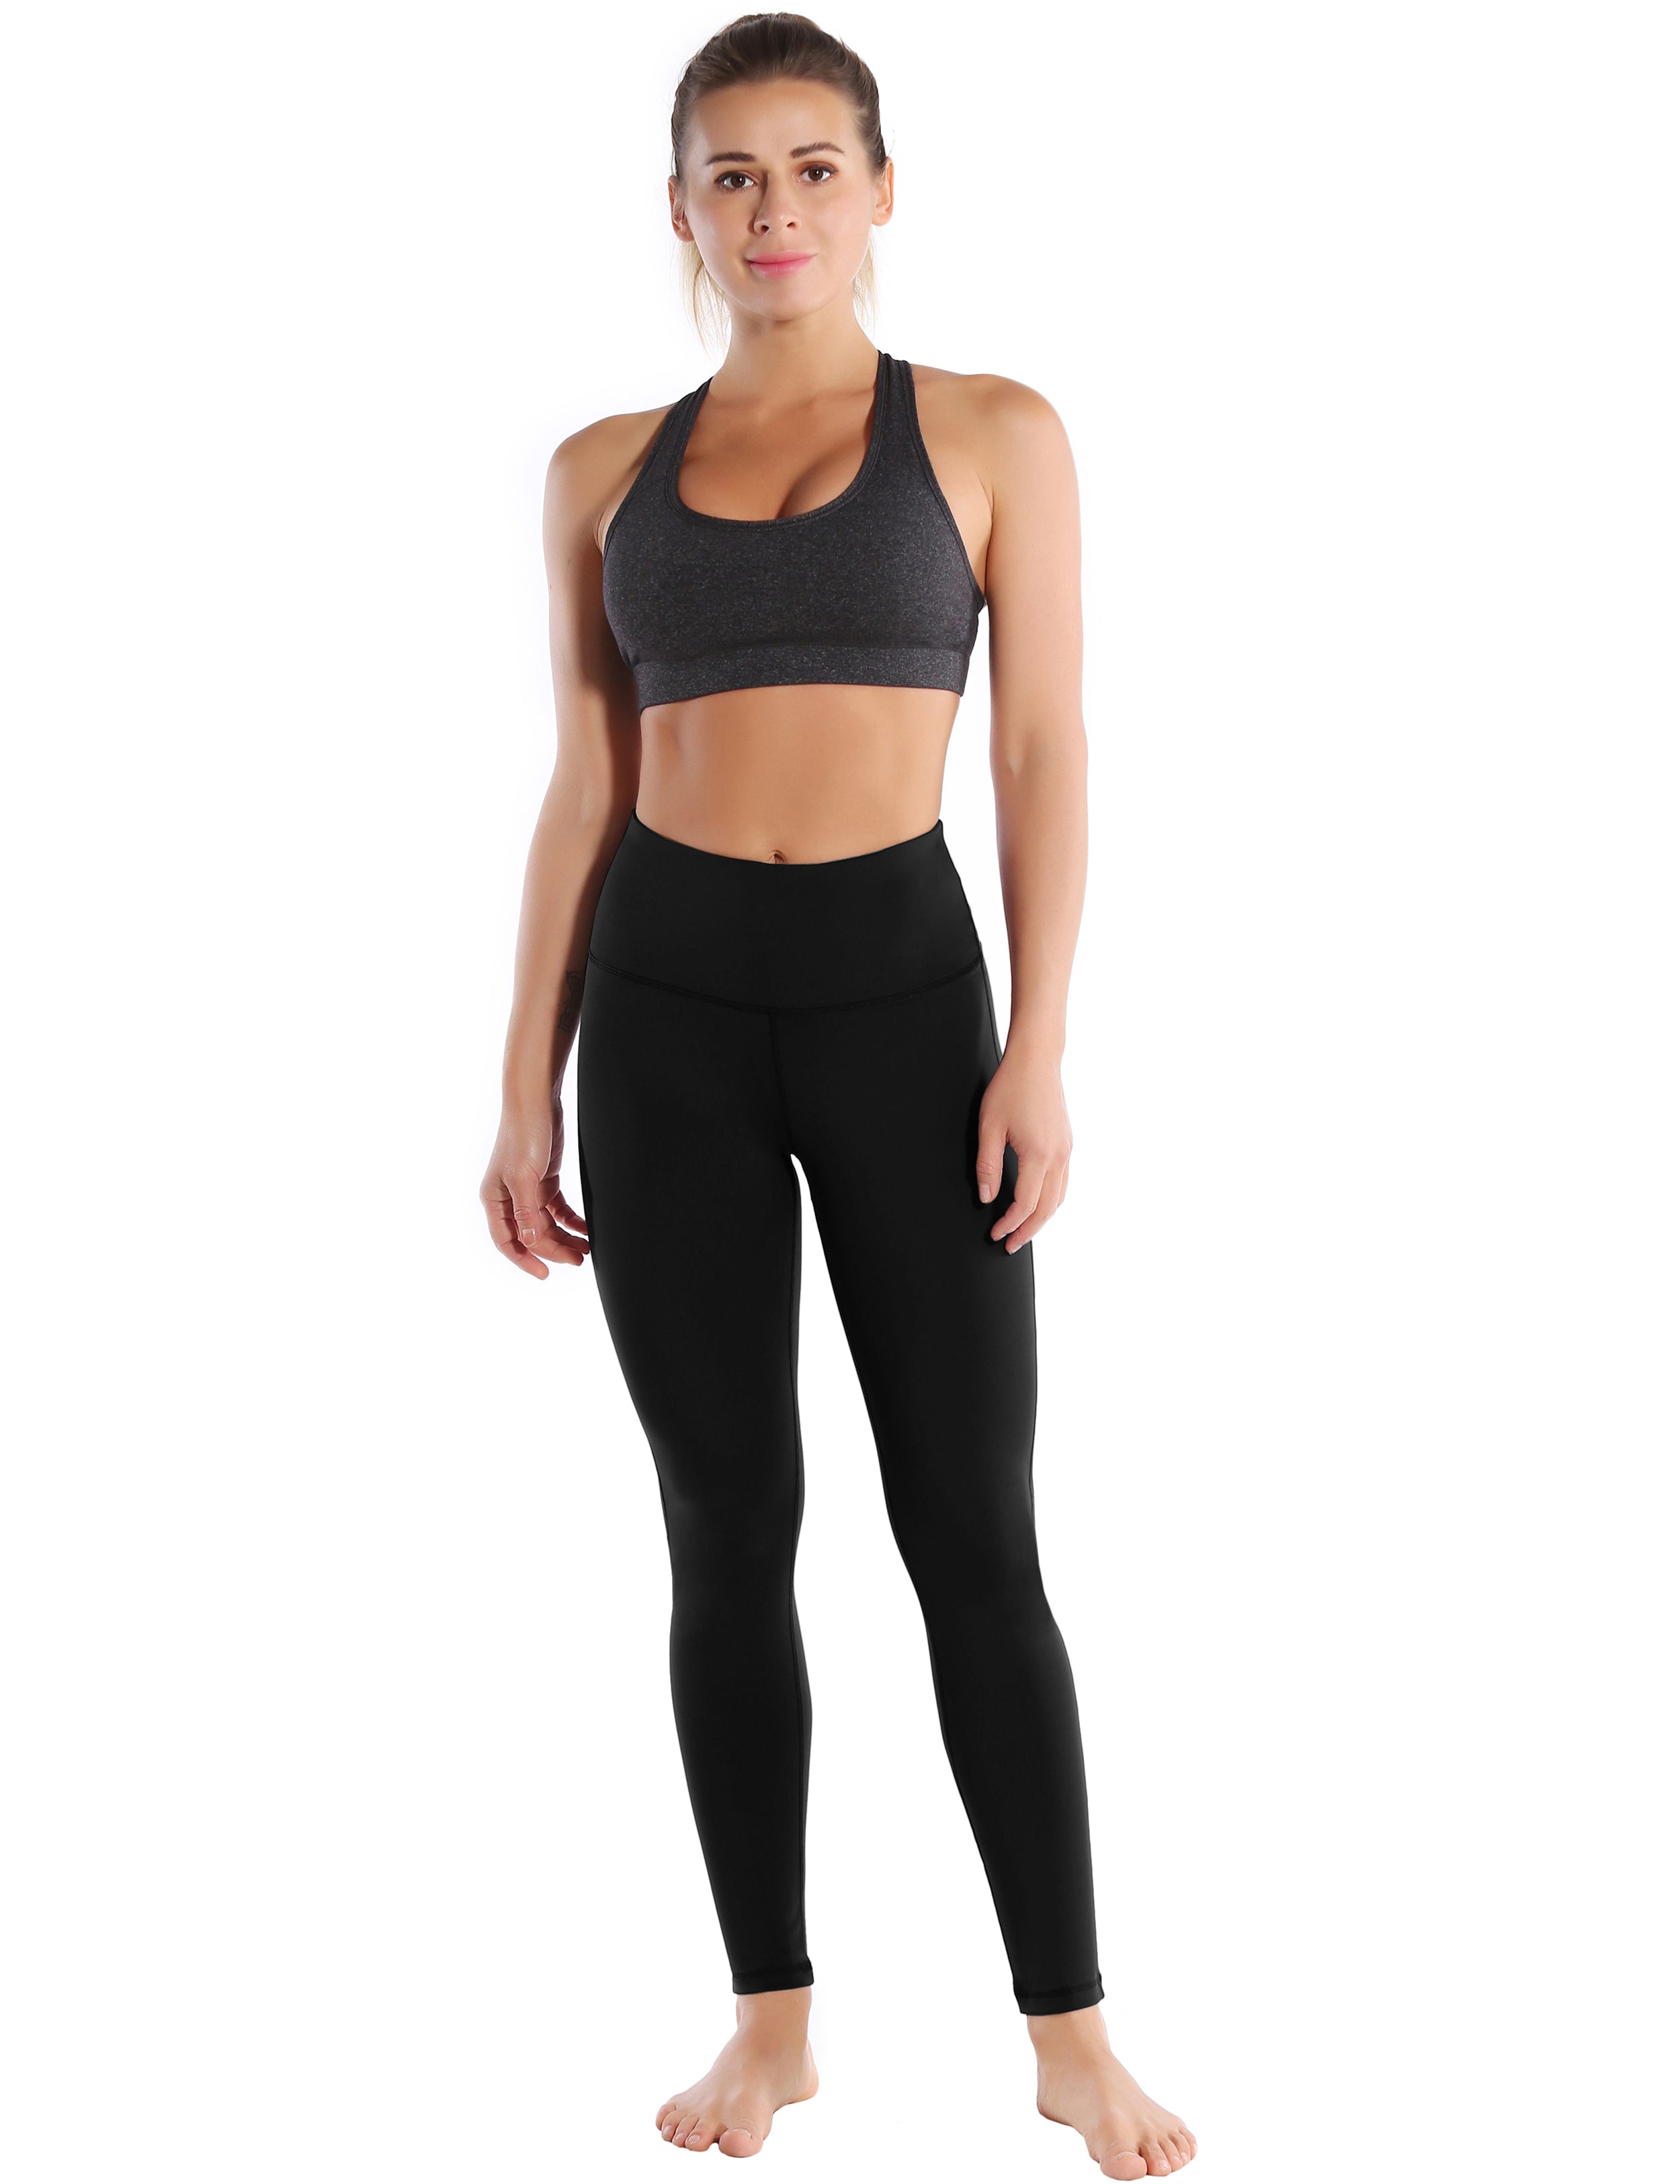 High Waist Side Line Golf Pants black Side Line is Make Your Legs Look Longer and Thinner 75%Nylon/25%Spandex Fabric doesn't attract lint easily 4-way stretch No see-through Moisture-wicking Tummy control Inner pocket Two lengths